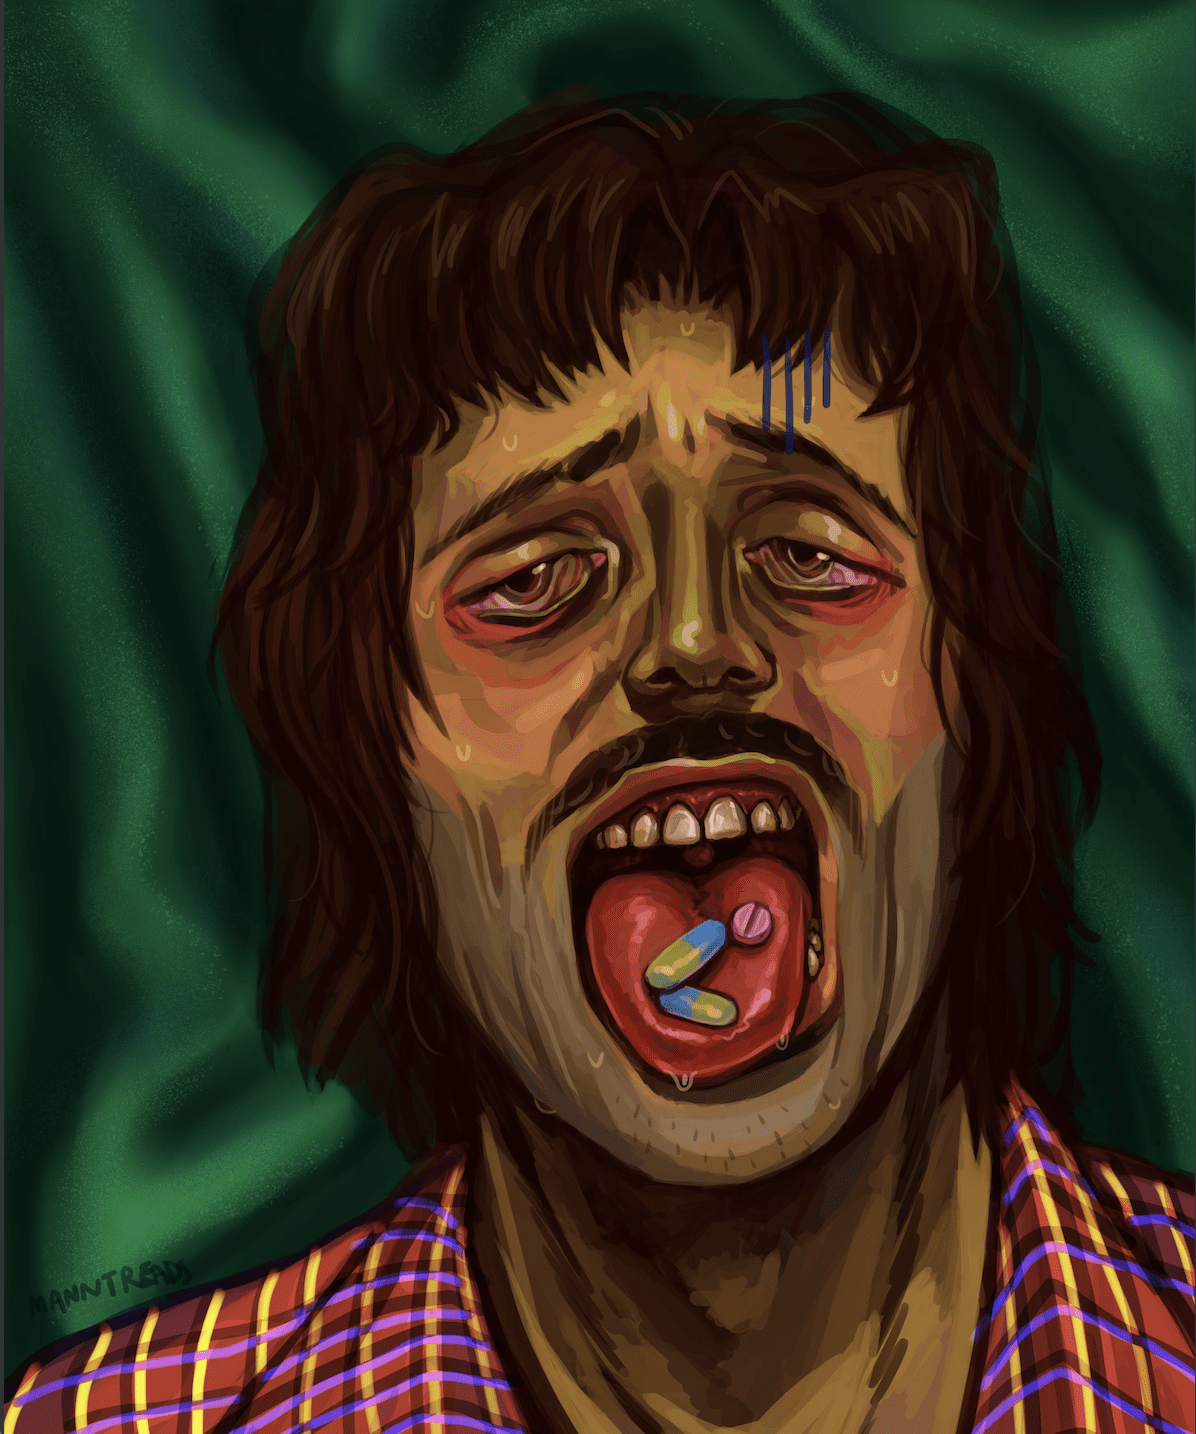 mac, sweaty, with a collection of pills on his tongue